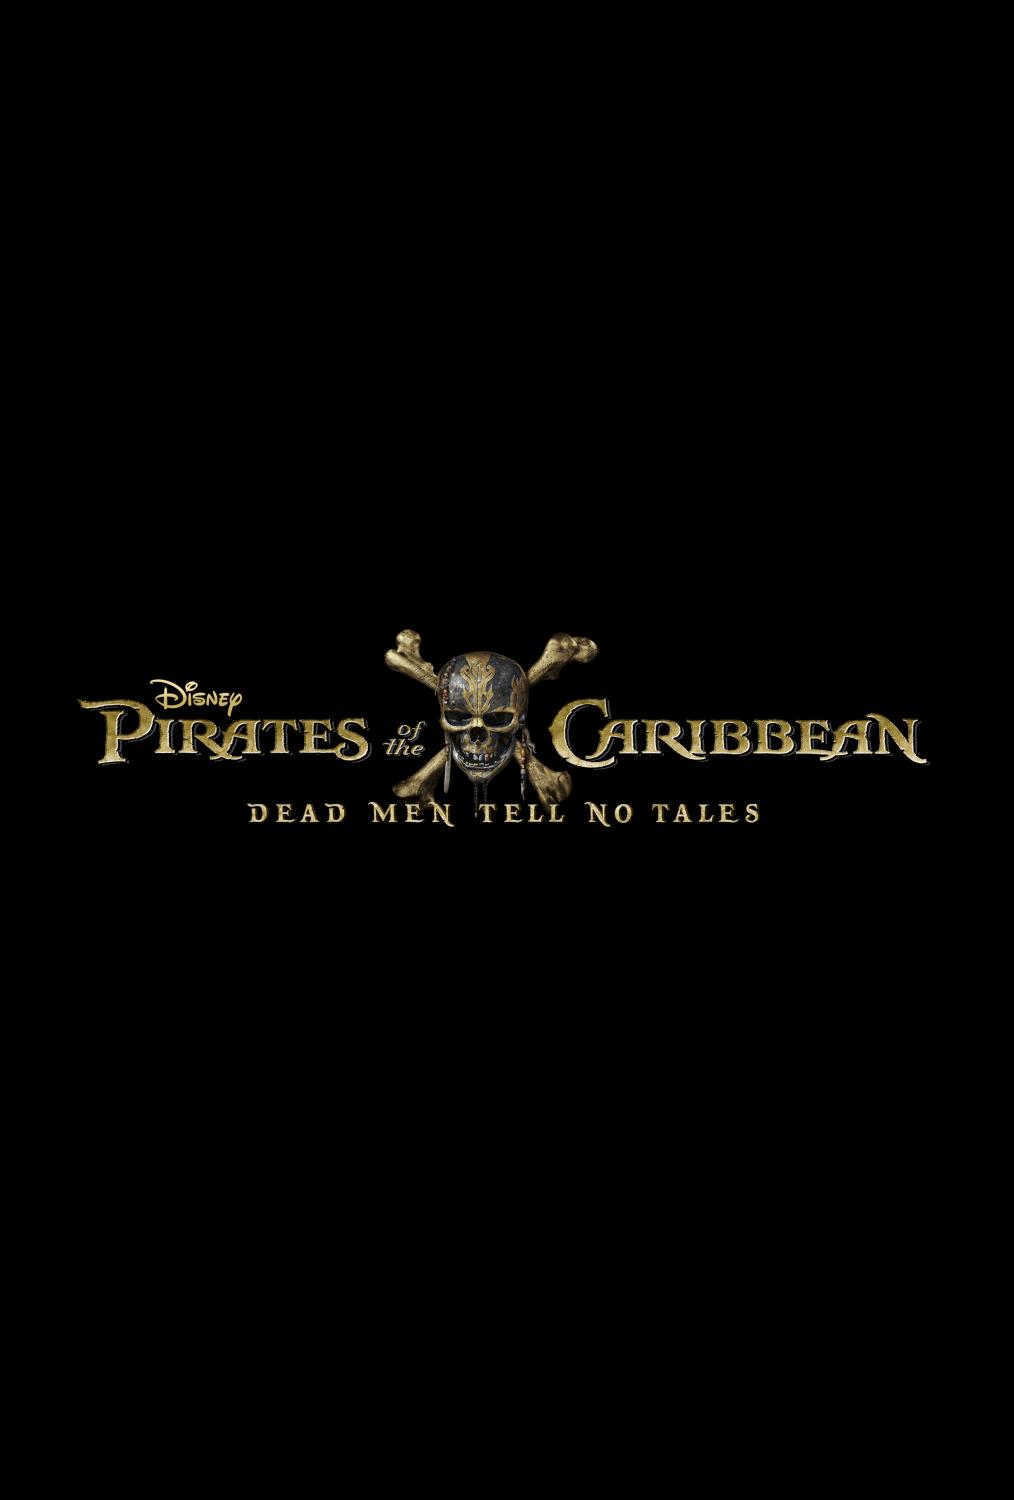 PIRATES OF THE CARIBBEAN: DEAD MEN TELL NO TALES Opens in Theaters Everywhere May 26th 2017